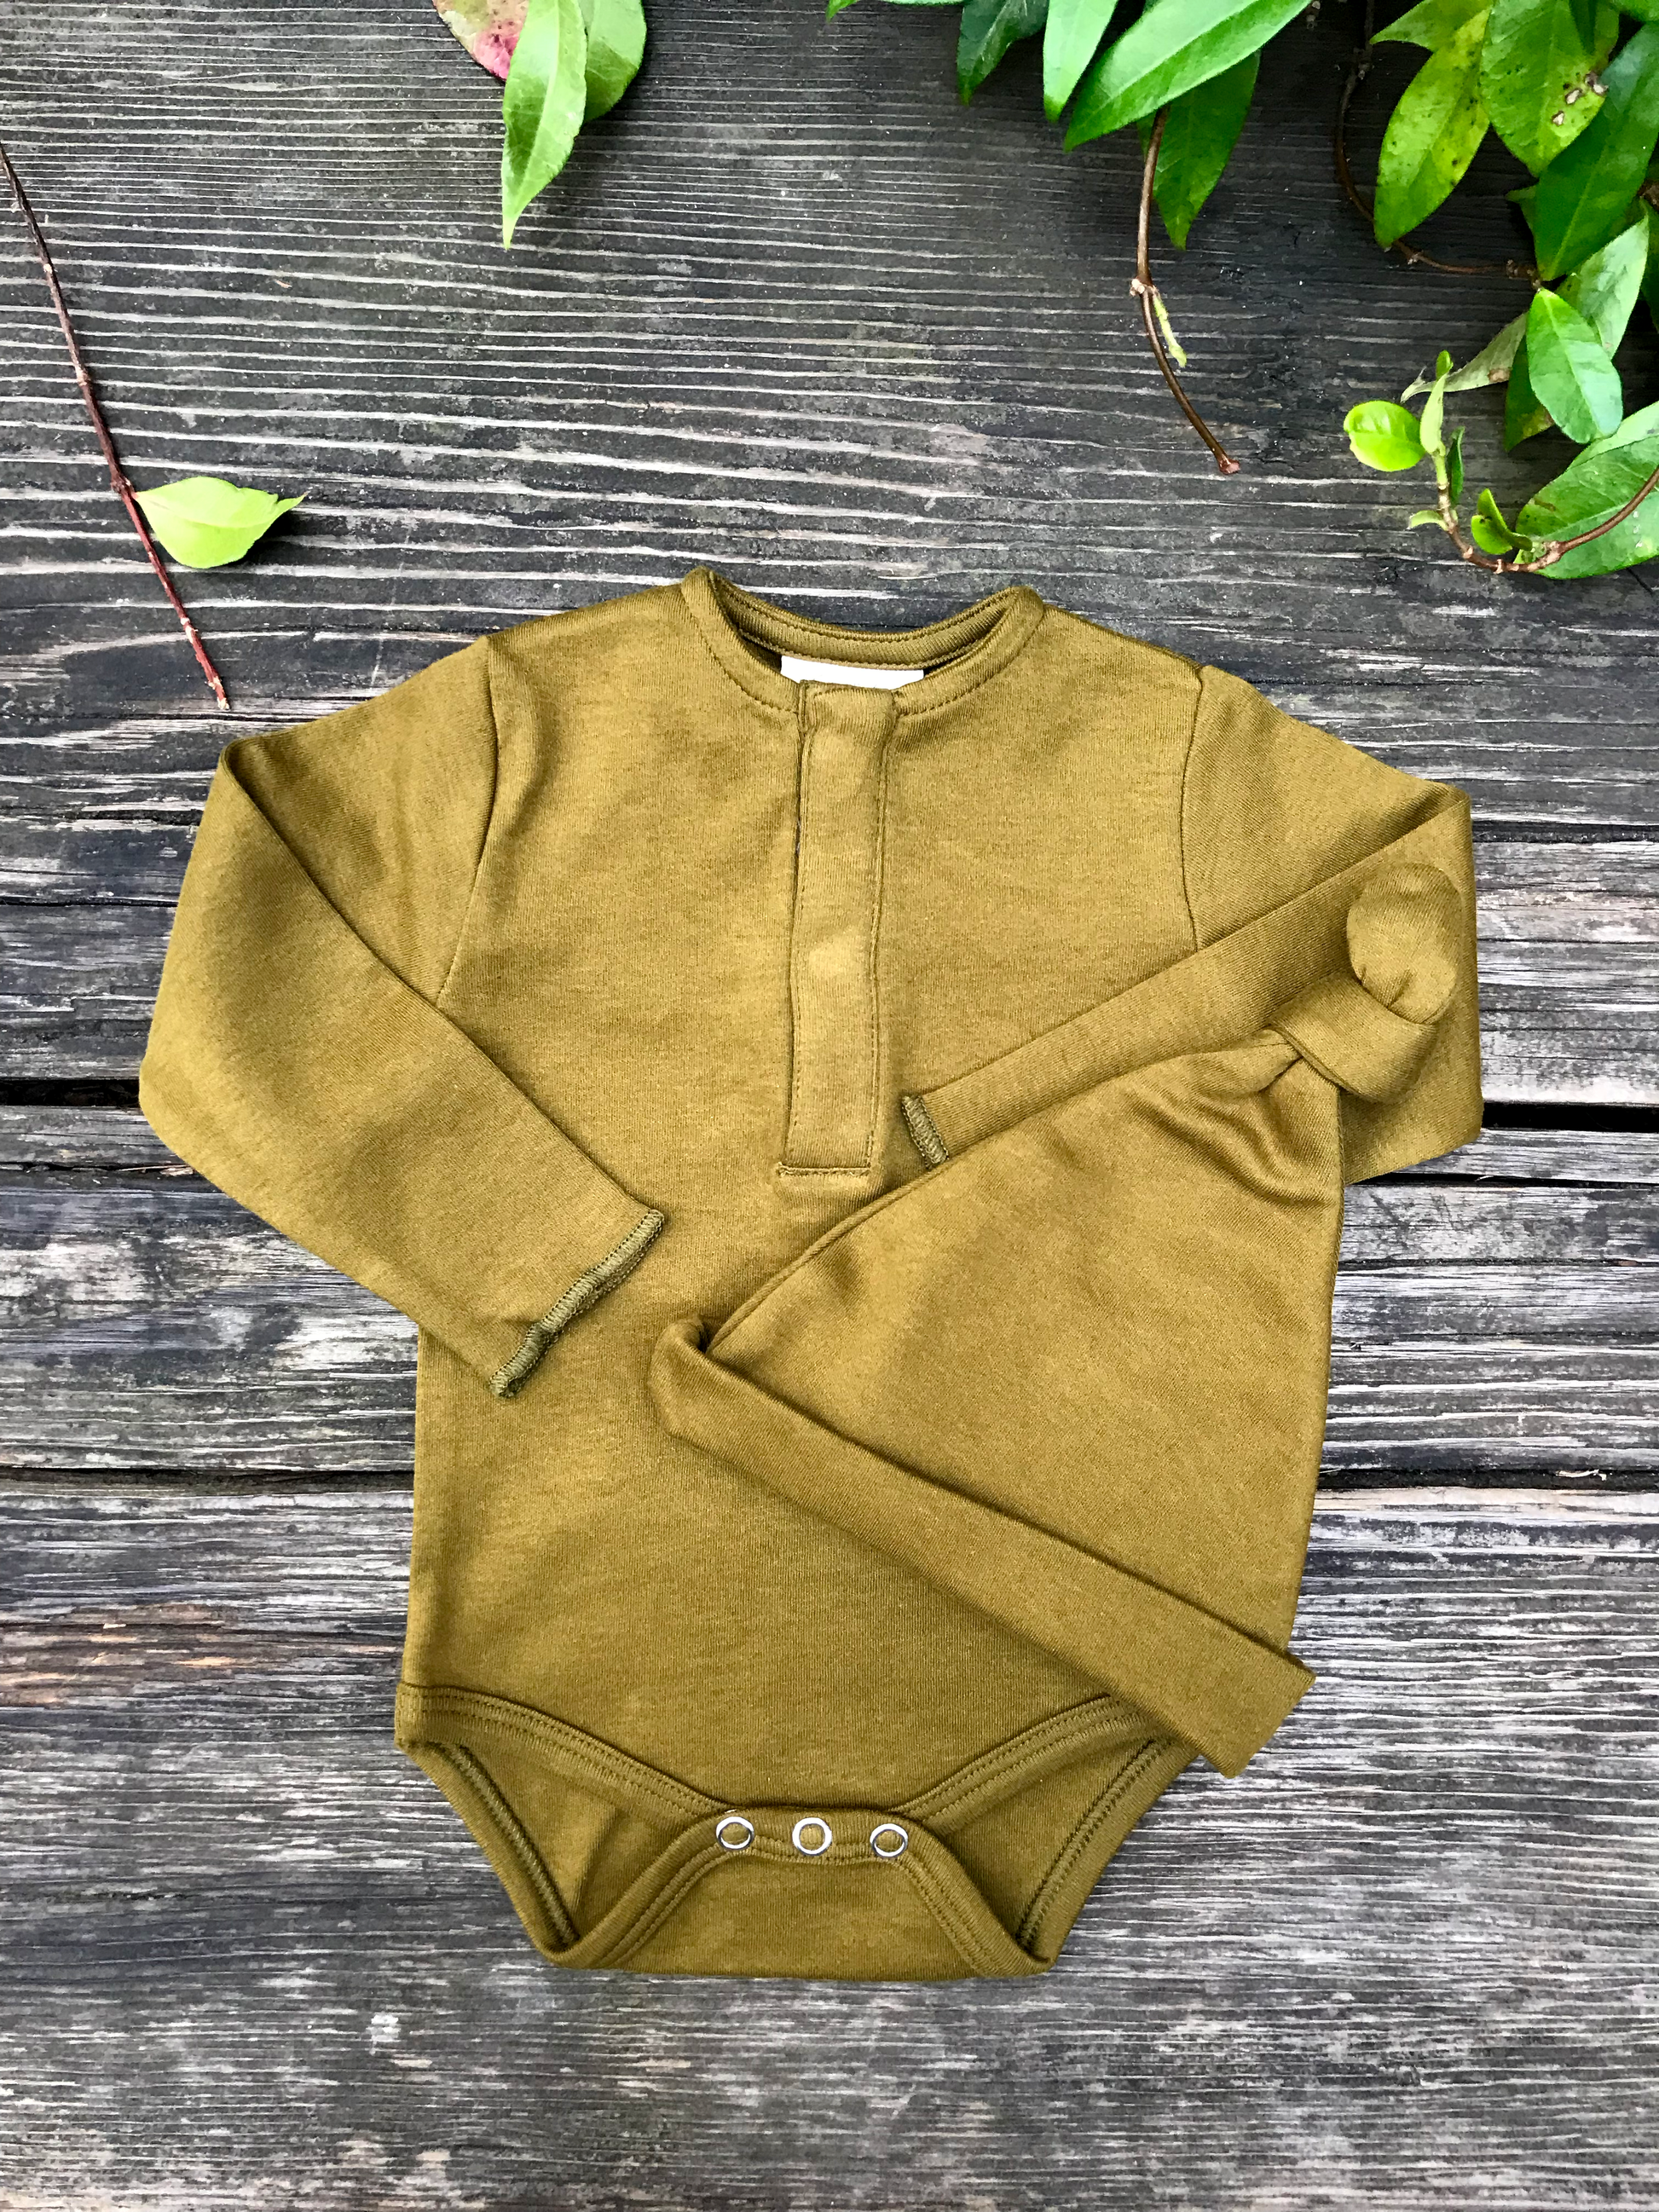 Olive hat and onesie